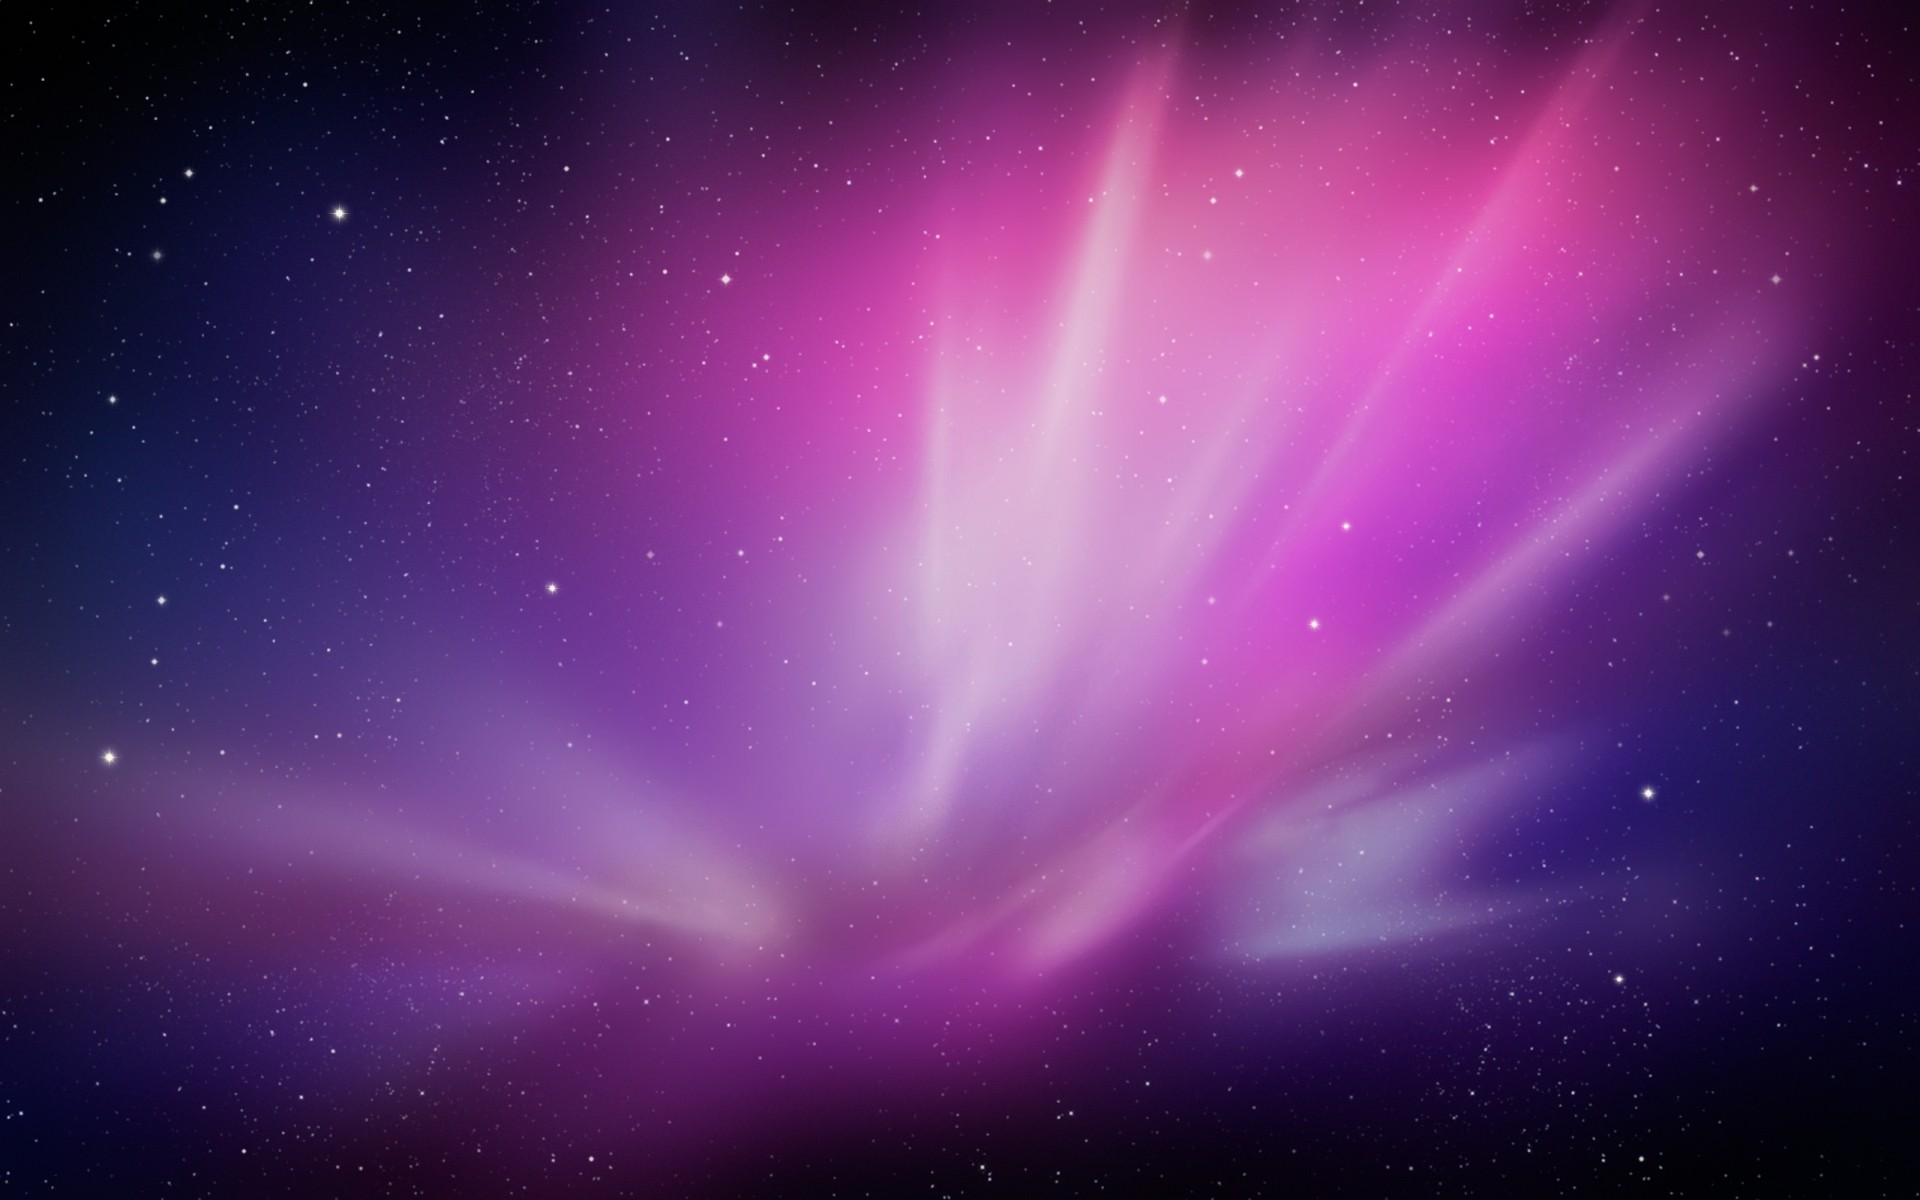 Imac Wallpaper In Different Screen Resolutions Sizes And Most Used